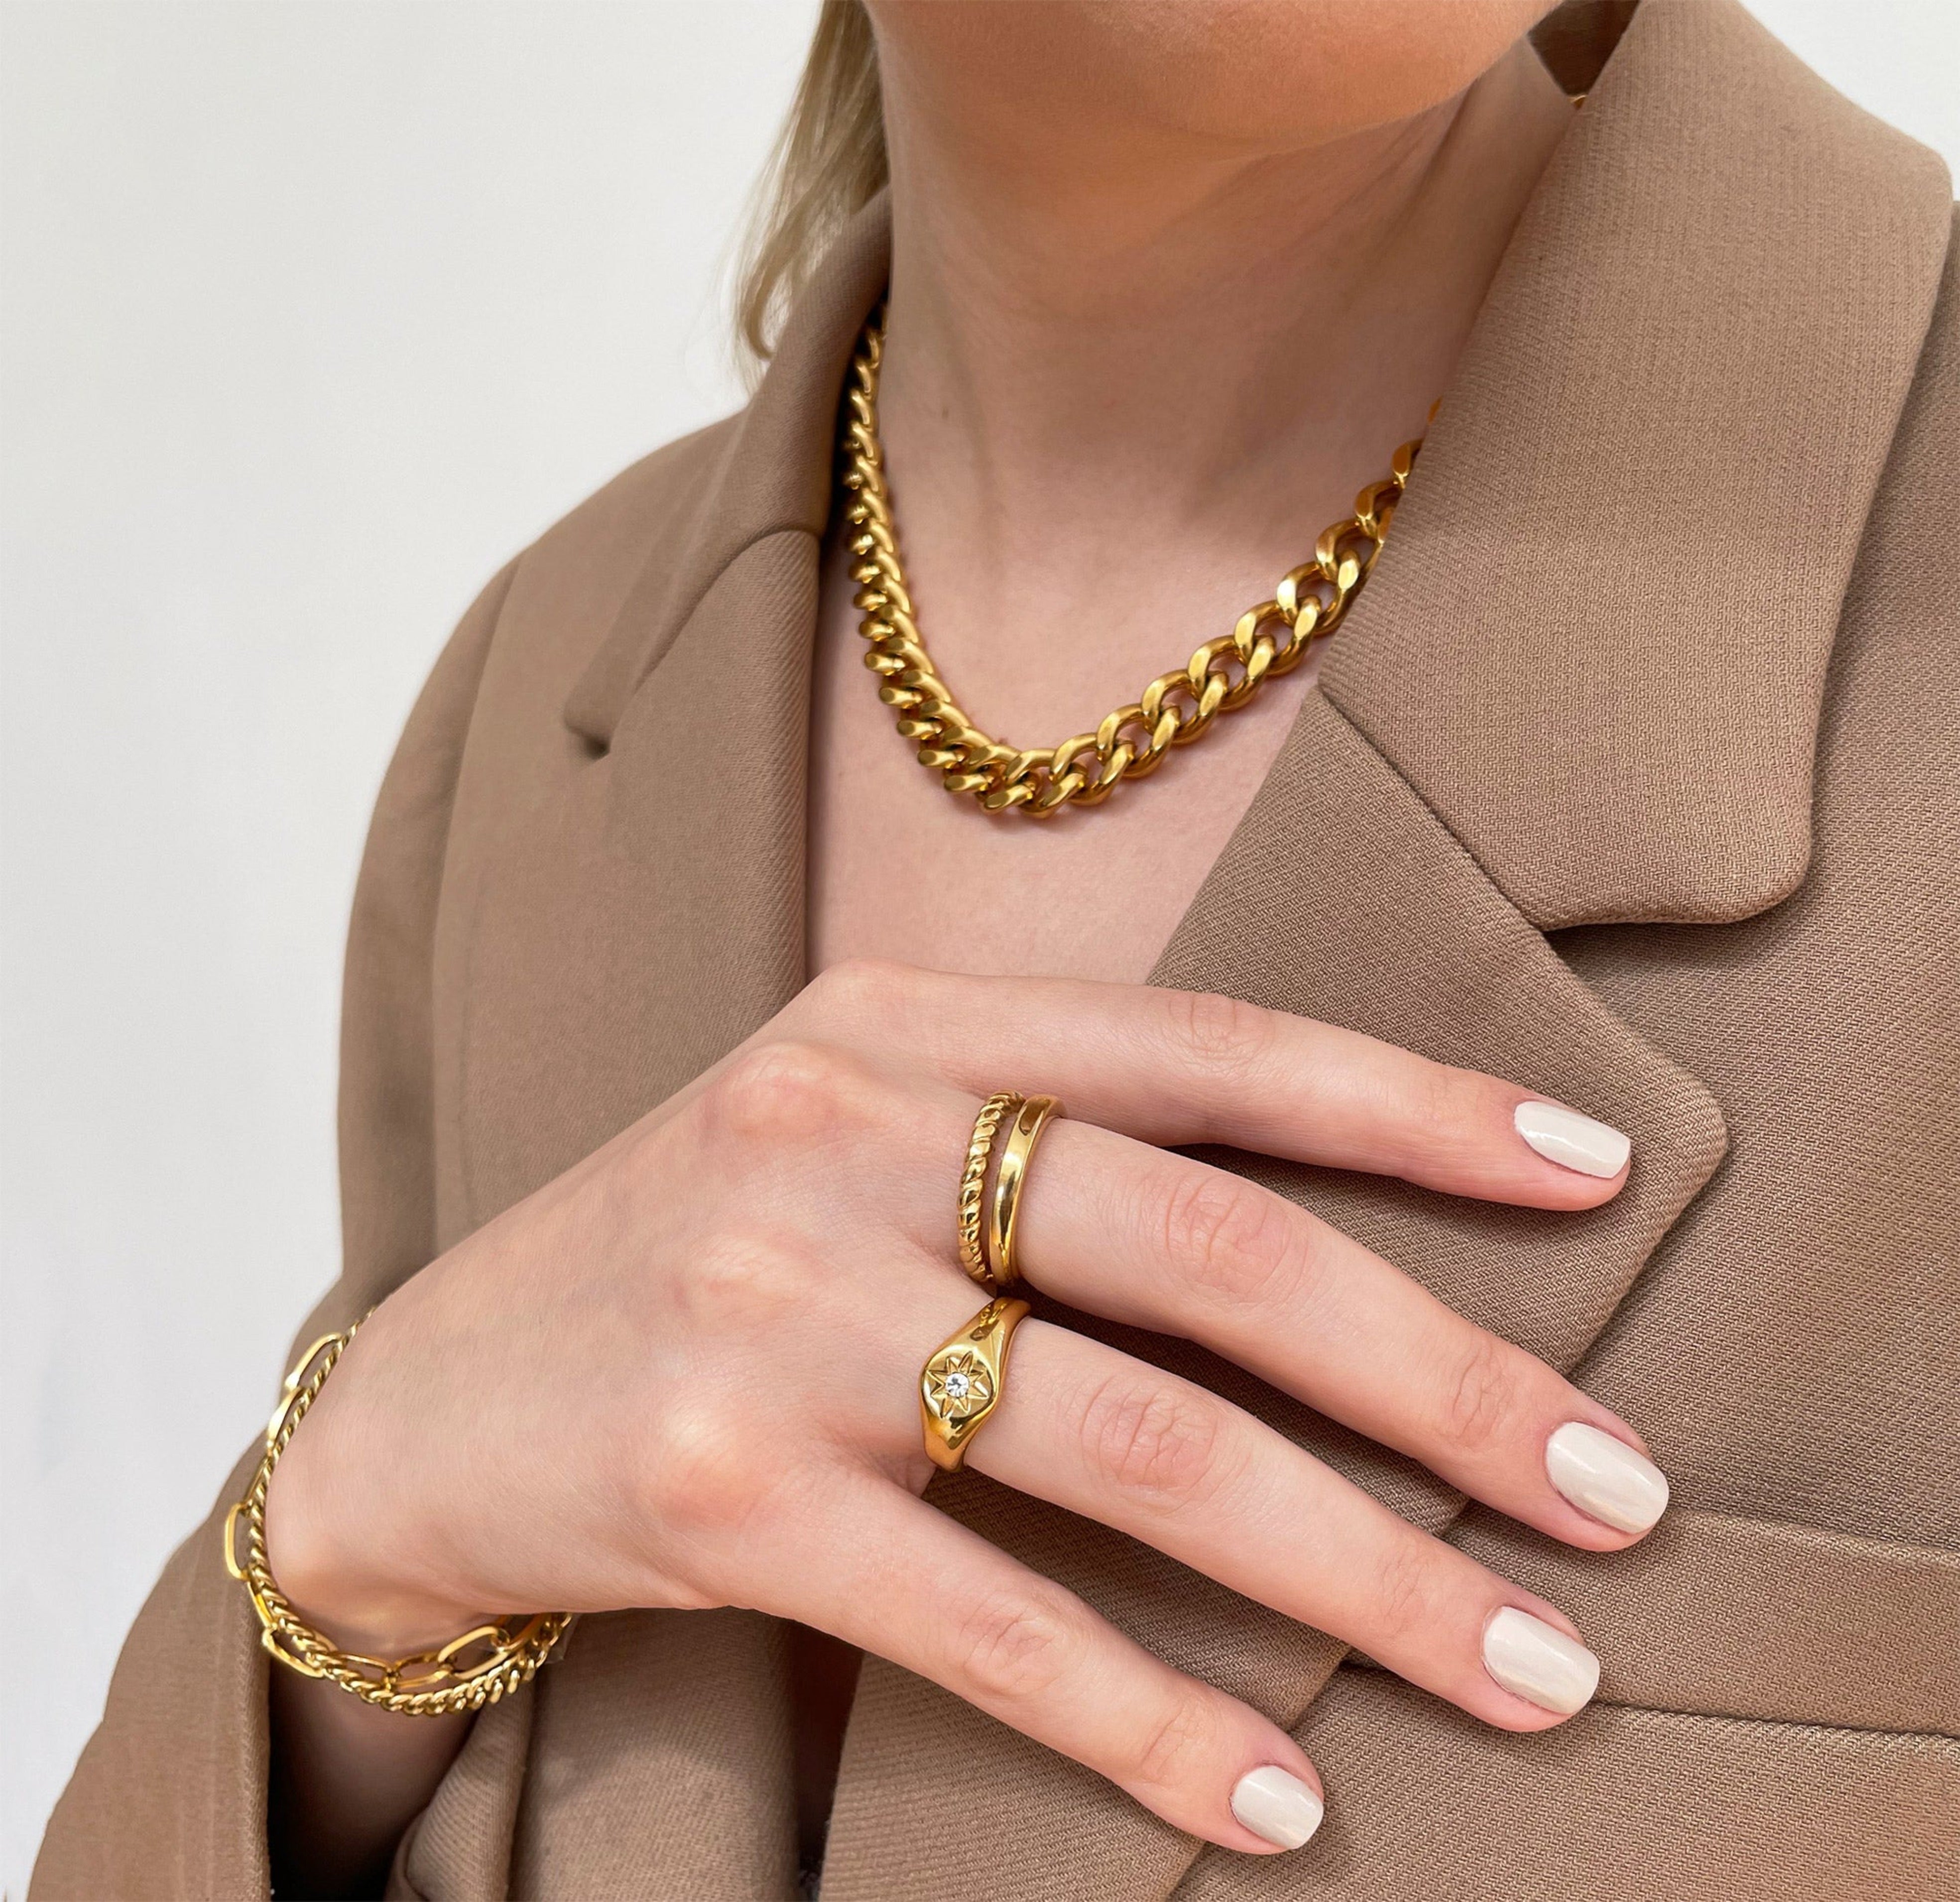 August gold star signet ring worn with the gold duo stack birdy ring . The jewelry is worn on a model and they are water resistant jewelry